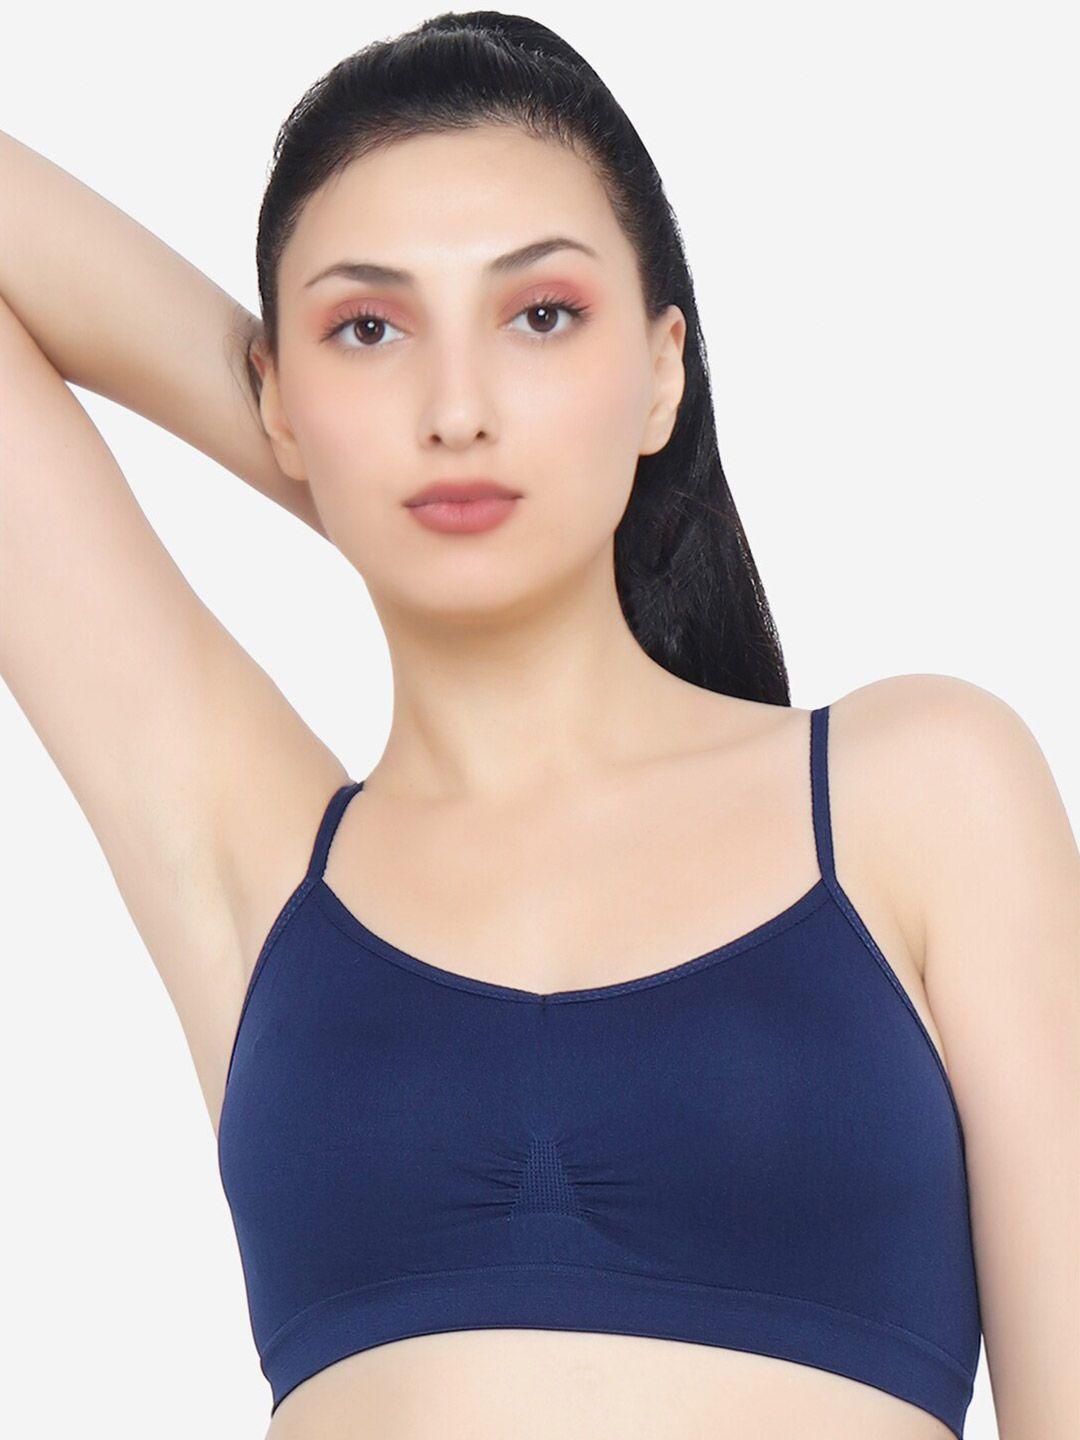 xoxo design navy blue solid non wired full coverage workout bra